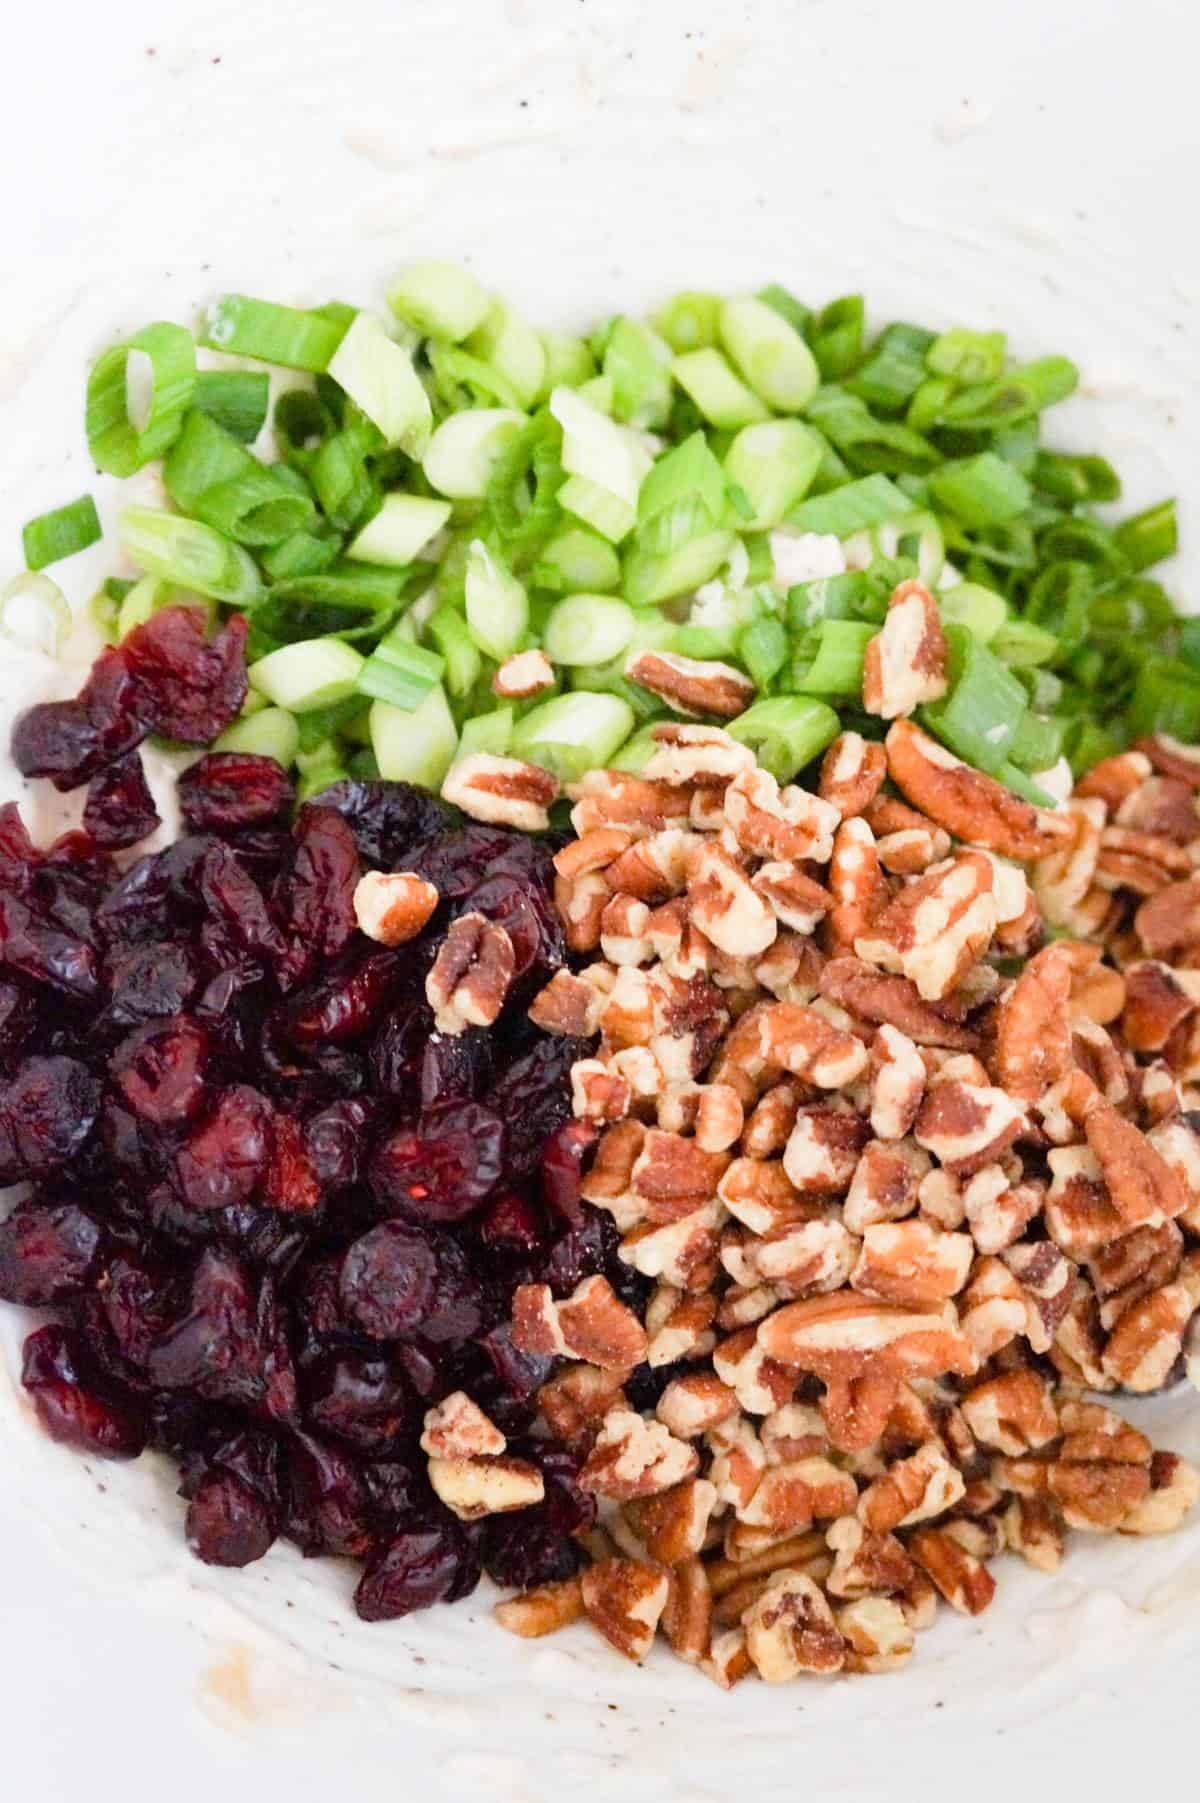 chopped green onions, dried cranberries and pecan pieces on top of chicken salad in a mixing bowl